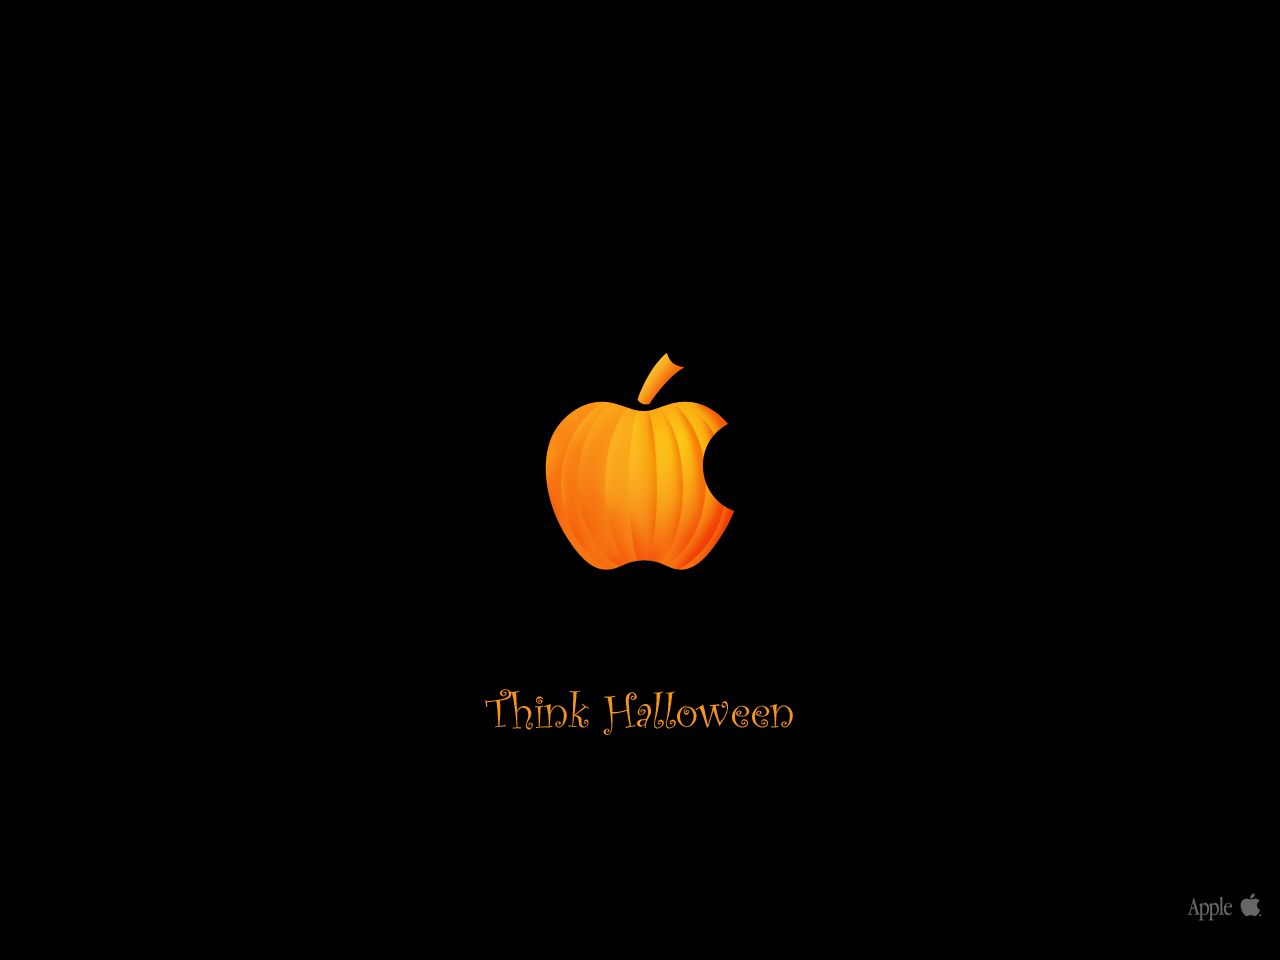 Cool Halloween Wallpaper and Halloween Icon for Free Download Leawo Official Blog